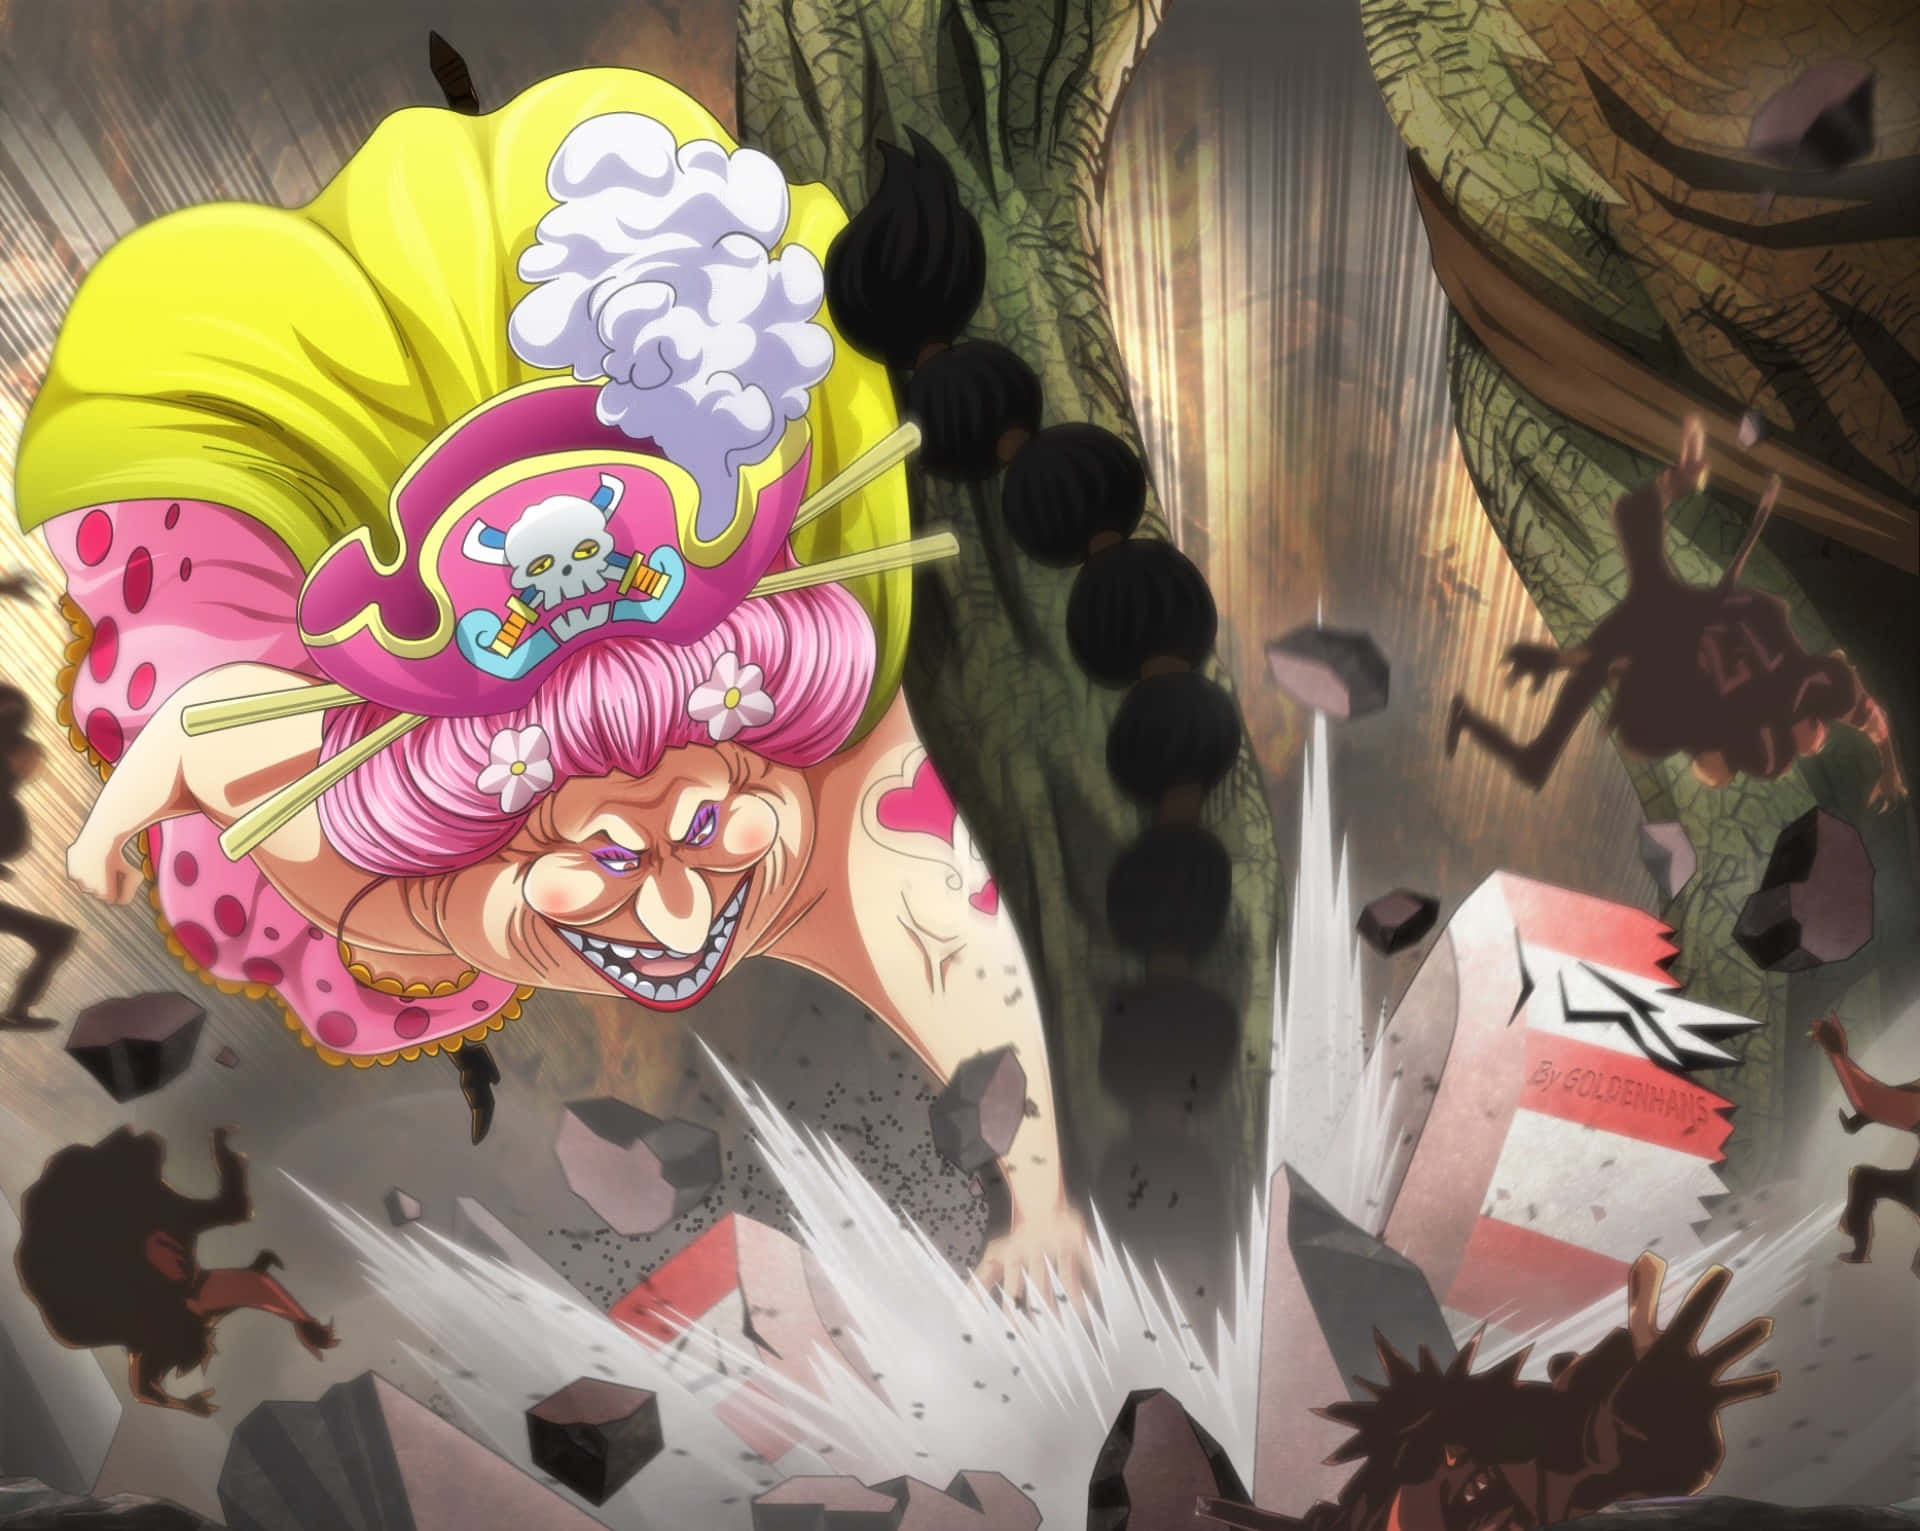 Charlotte Linlin, Yonko and Queen of Totto Land, displaying her powerful presence in the world of One Piece Wallpaper